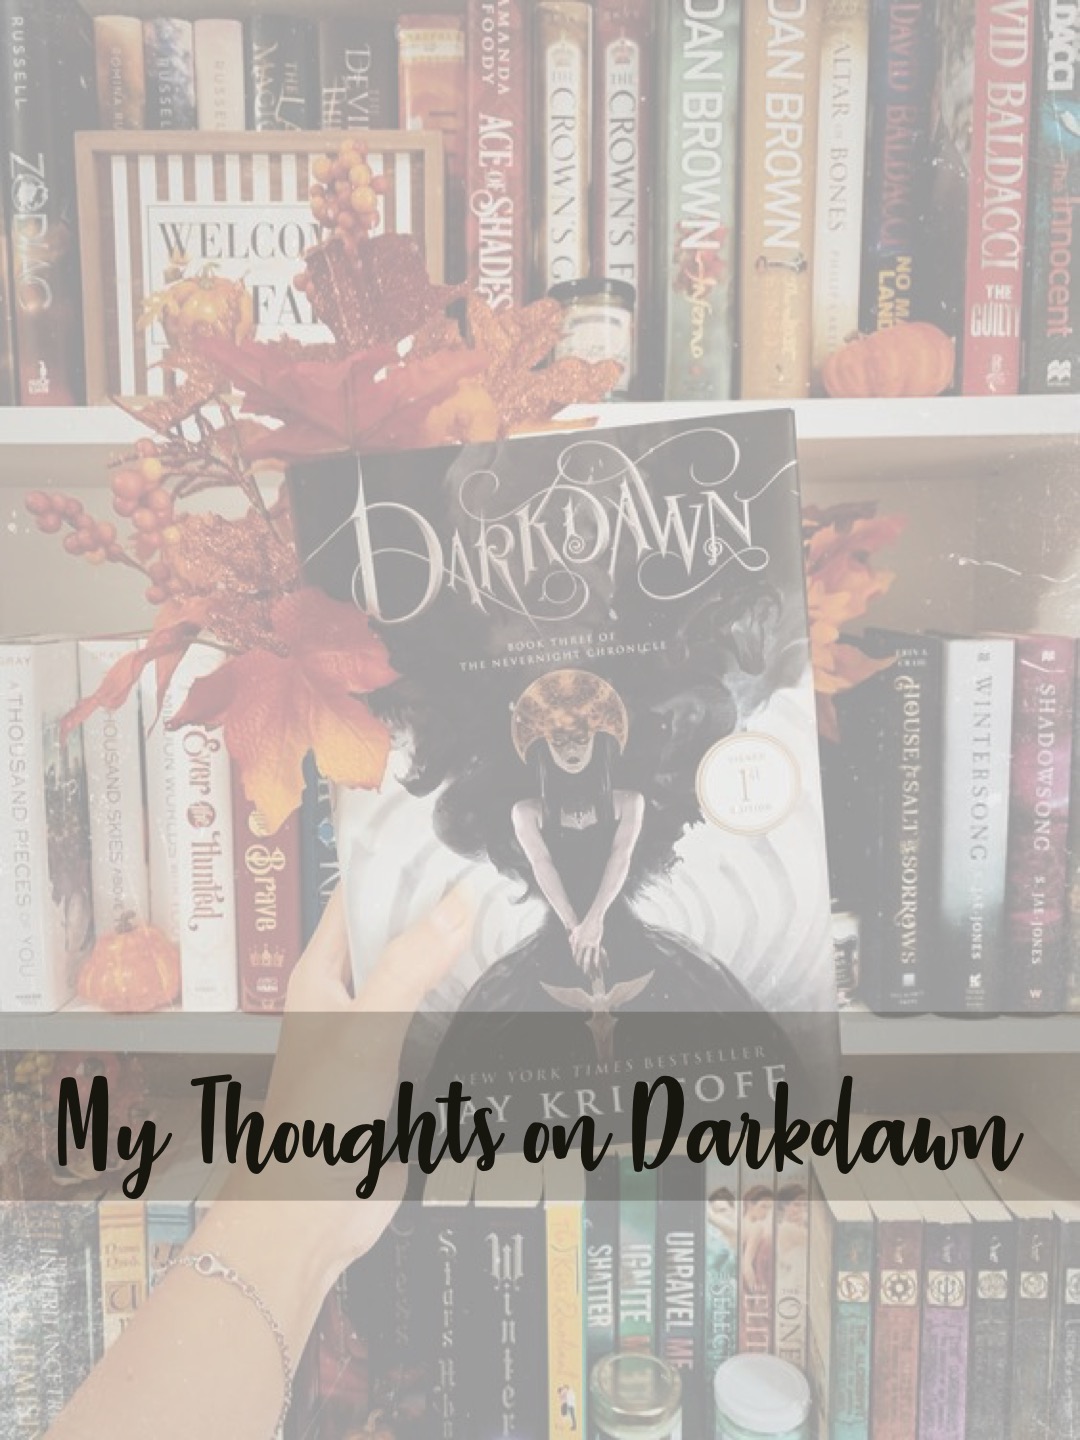 A Non-Spoiler-Free Collection of my Thoughts on Darkdawn